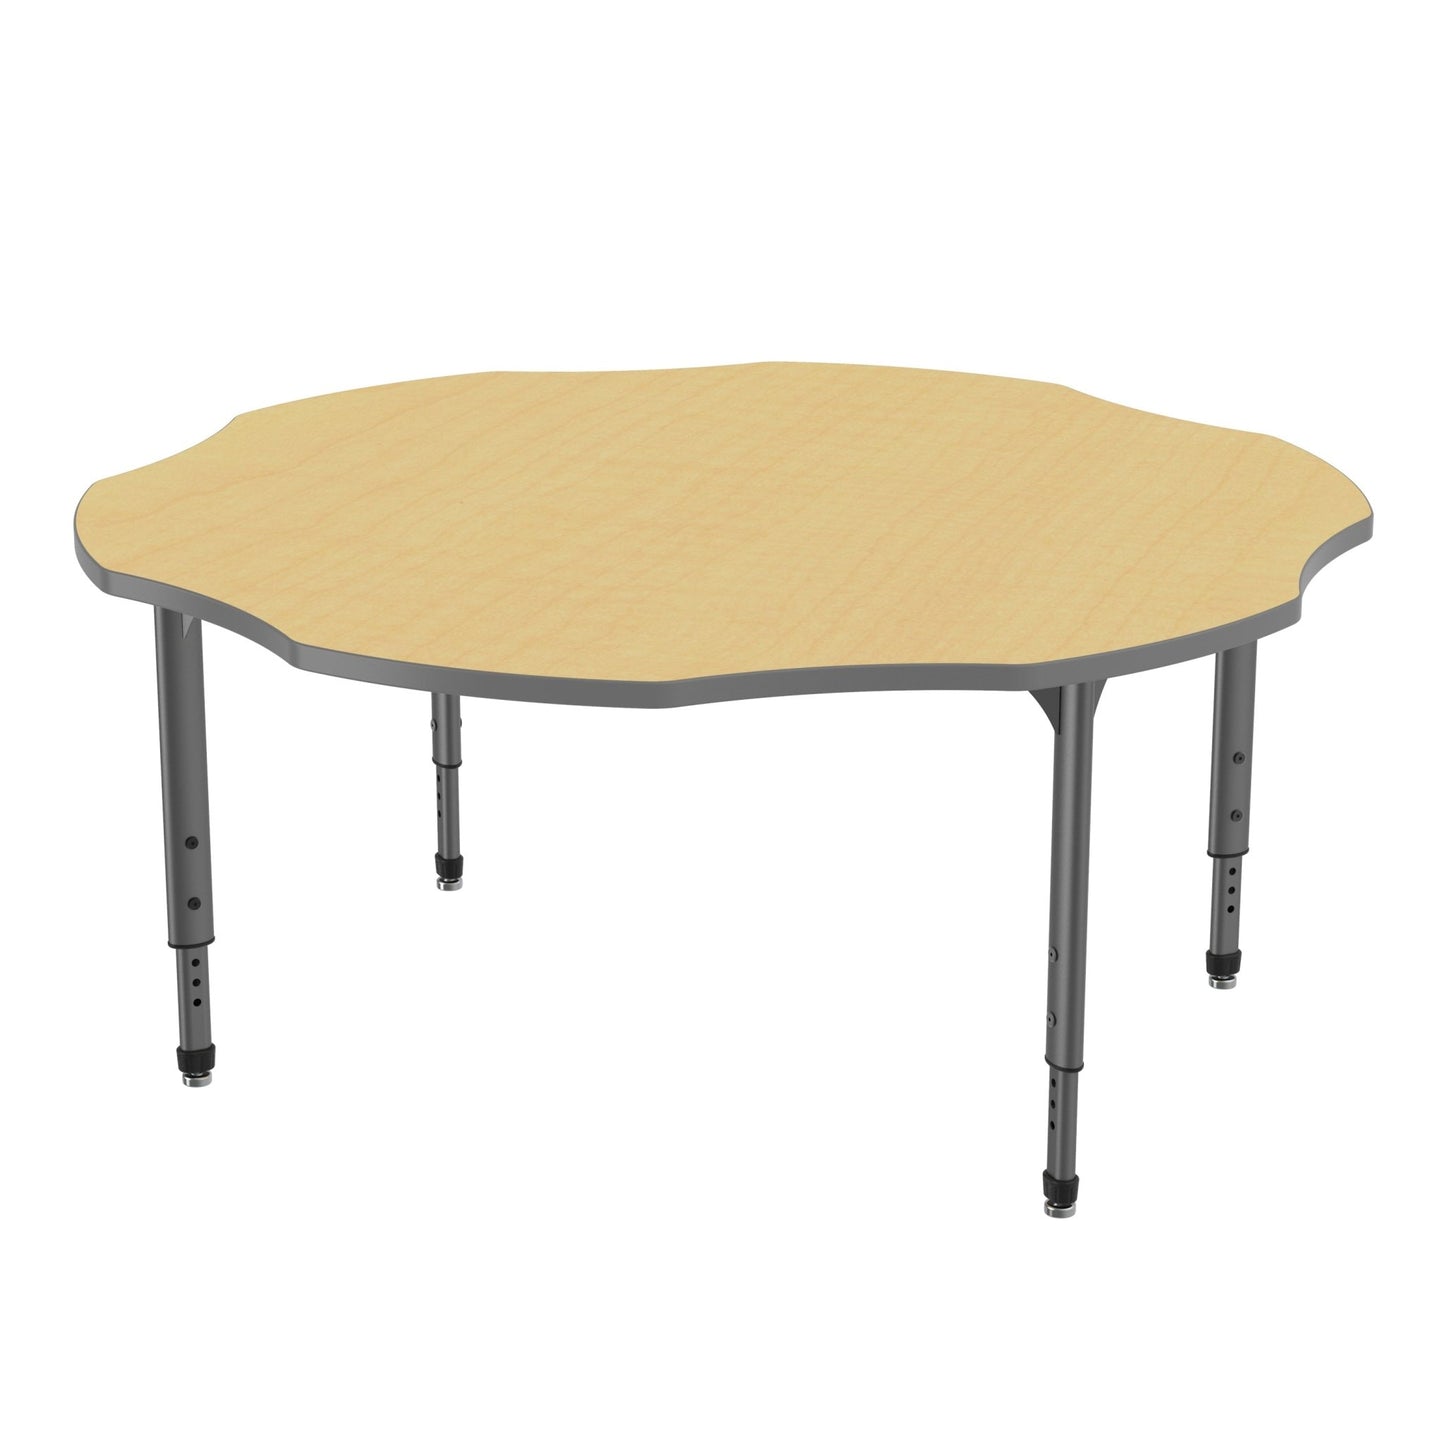 Marco Apex Series 60" Flower School Activity Table Adjustable Height 21" - 30" (38 - 2208 - MA) - SchoolOutlet